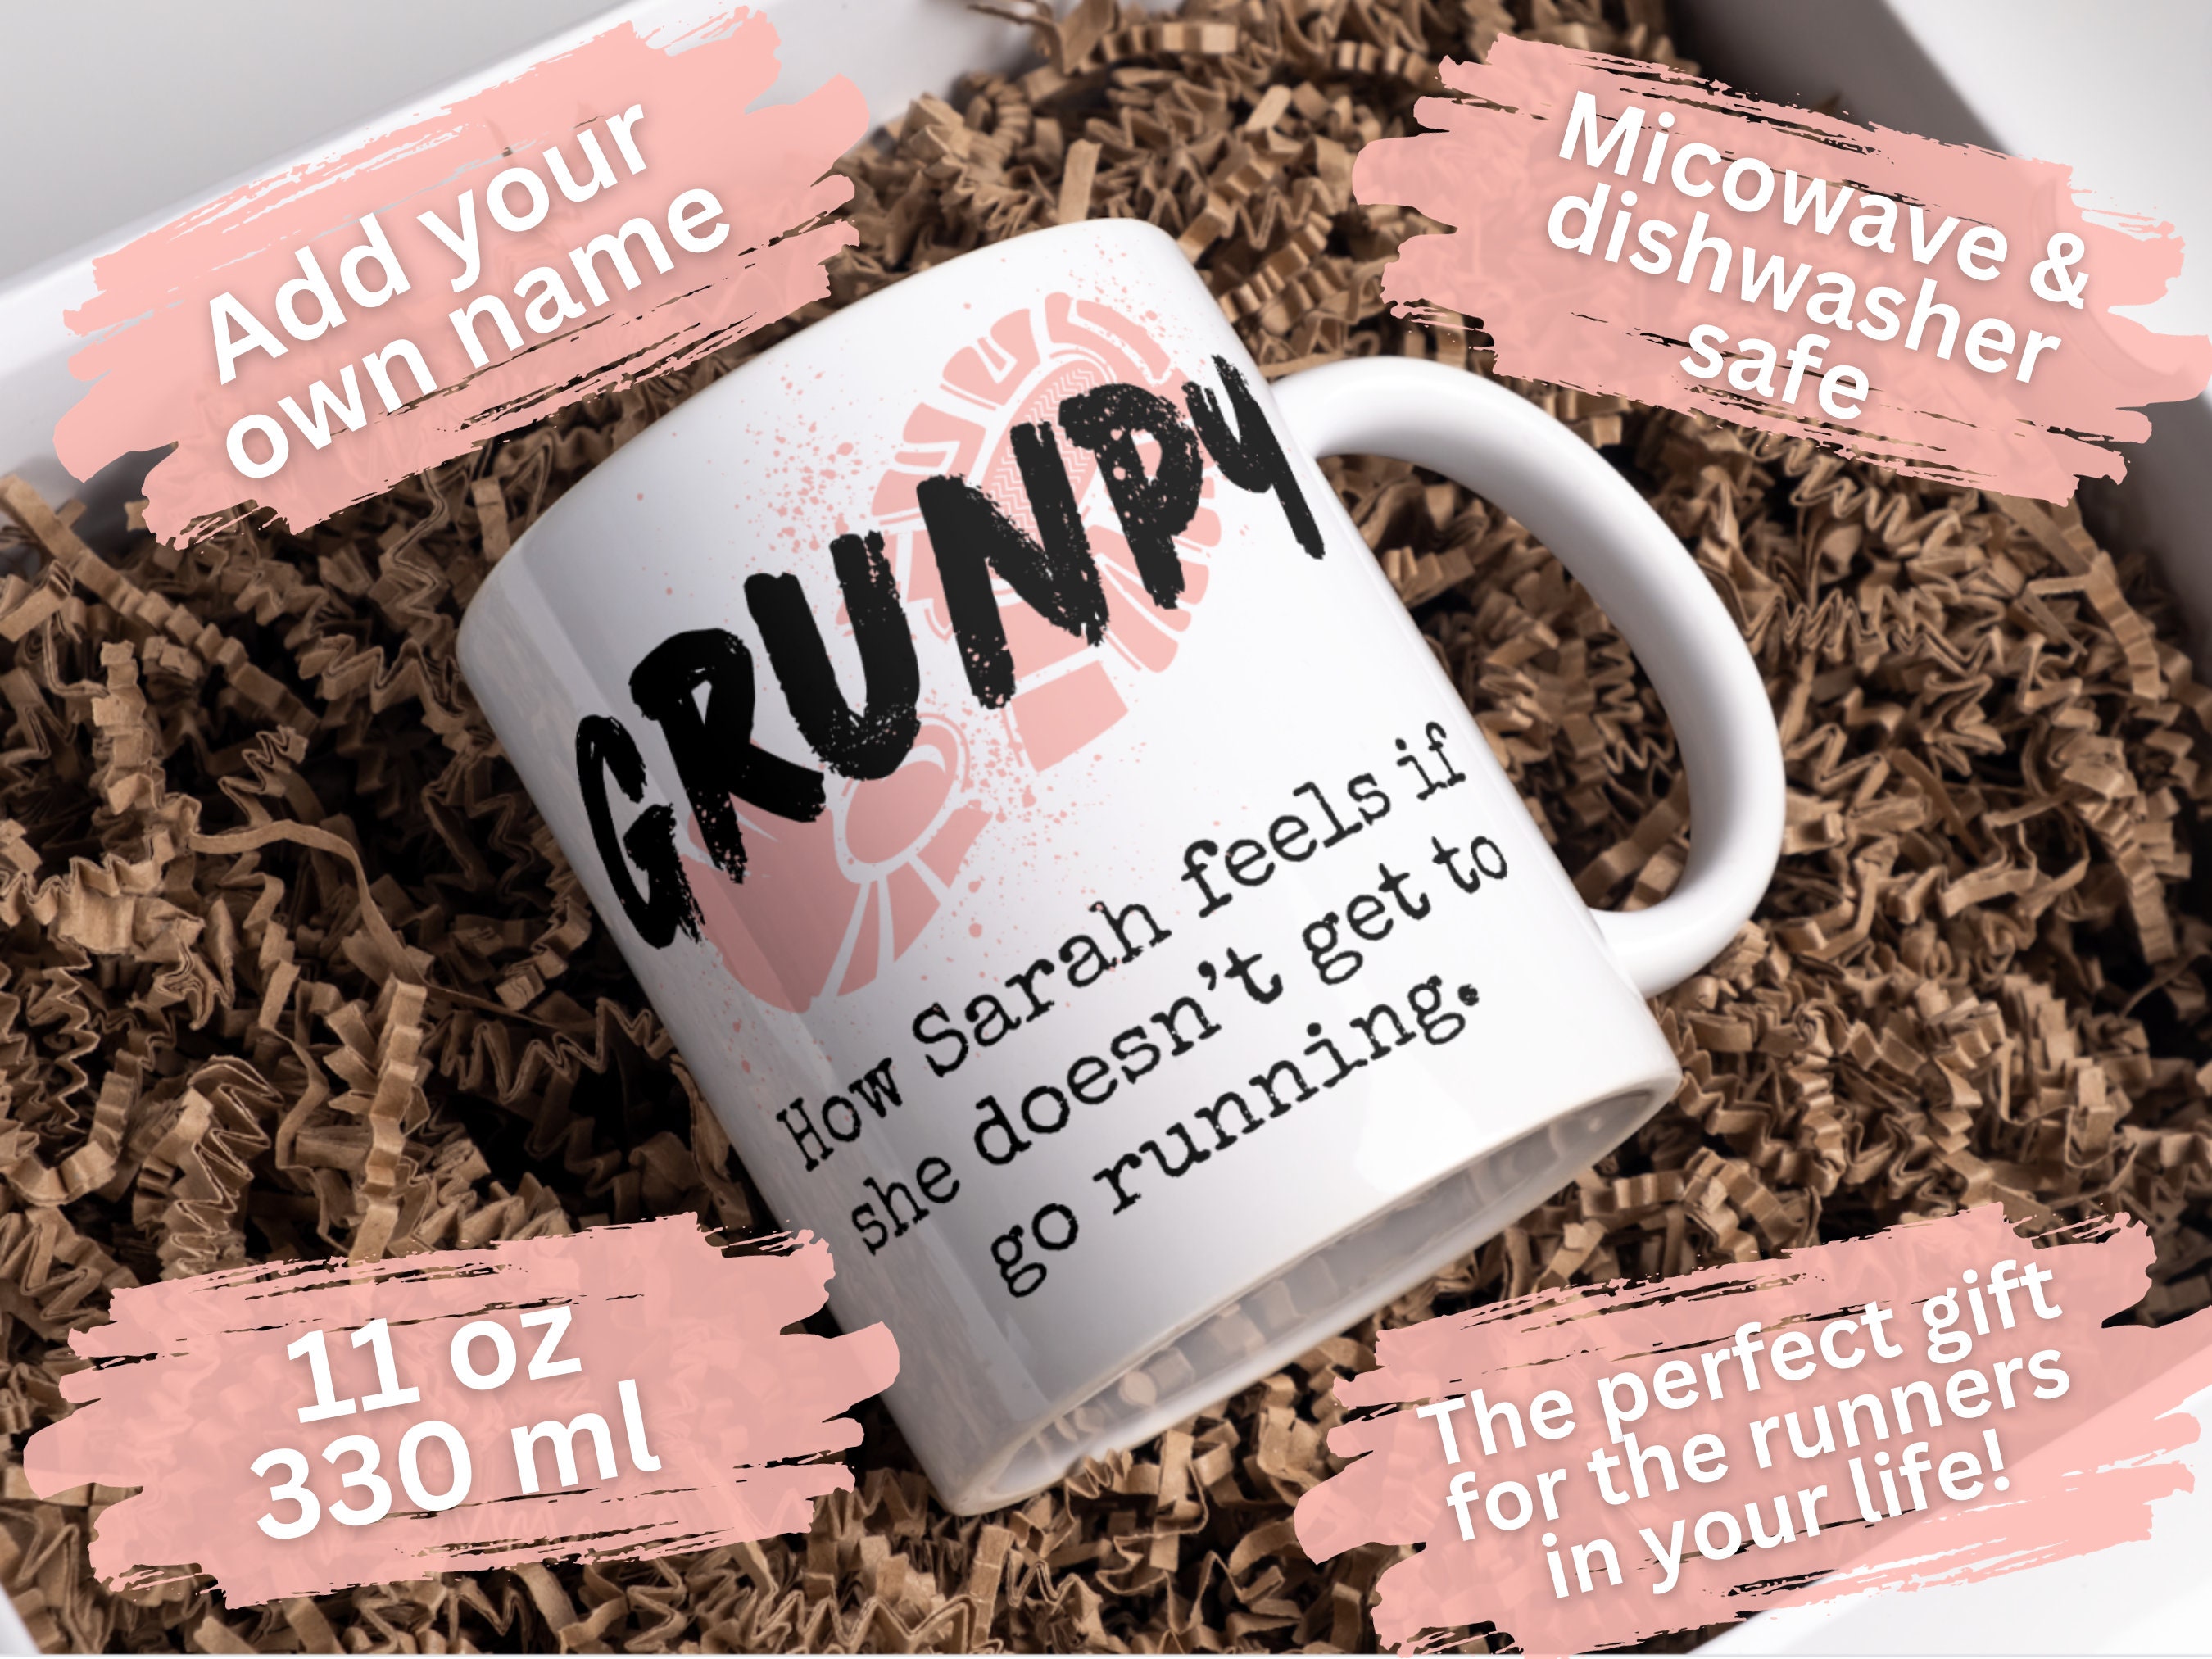 ThisWear Funny Runner Gifts 5k to Marathon Measurement Runners Cup